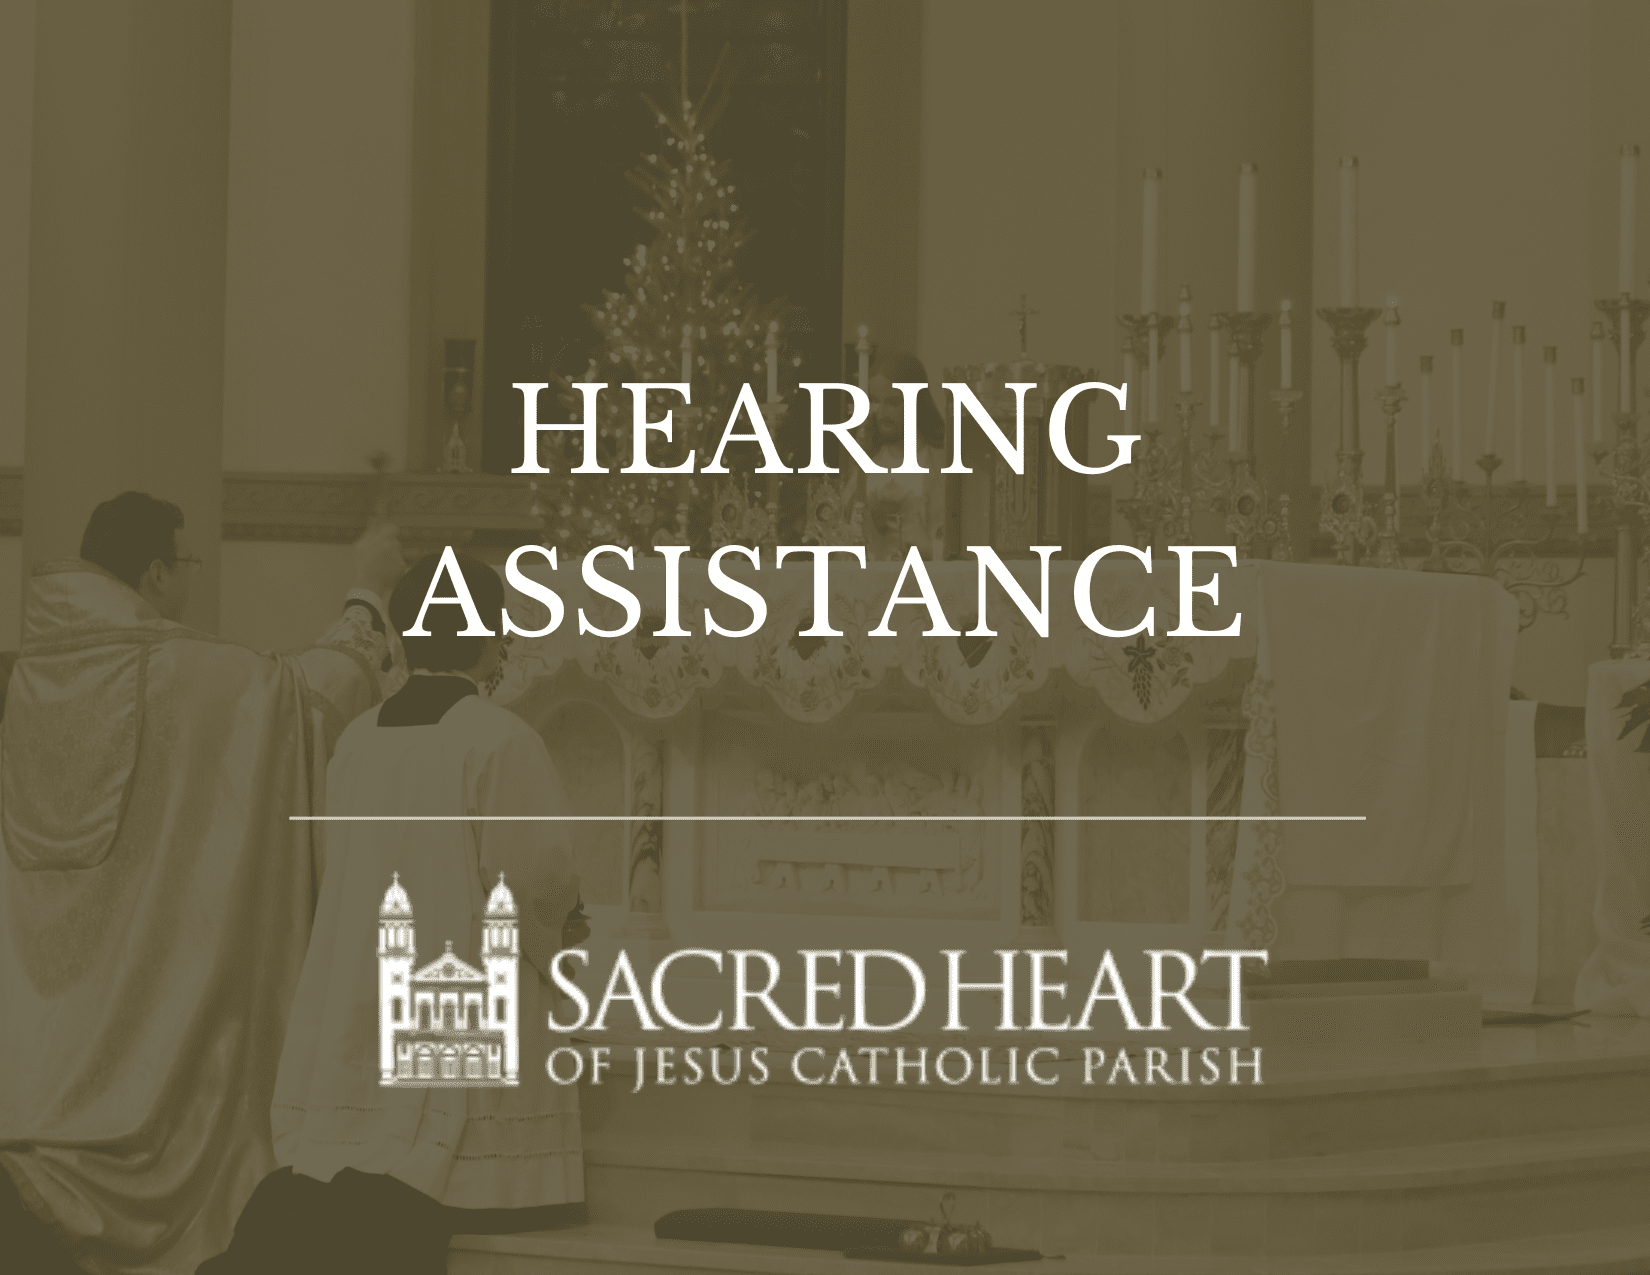 Hearing Assistance Available